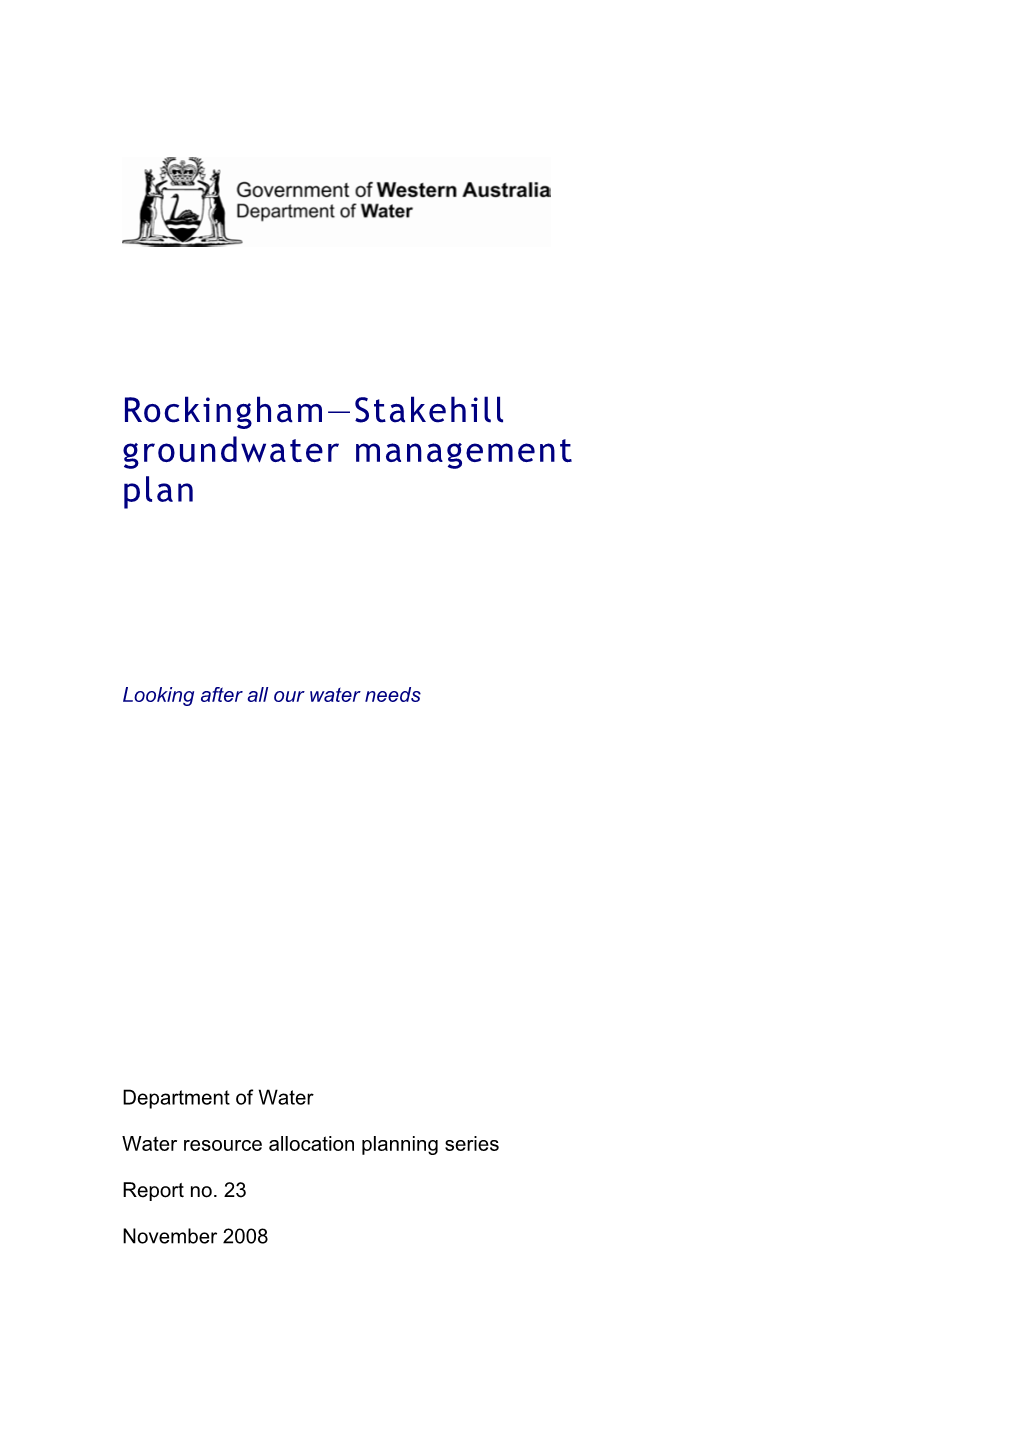 Rockingham-Stakehill Groundwater Allocation Plan